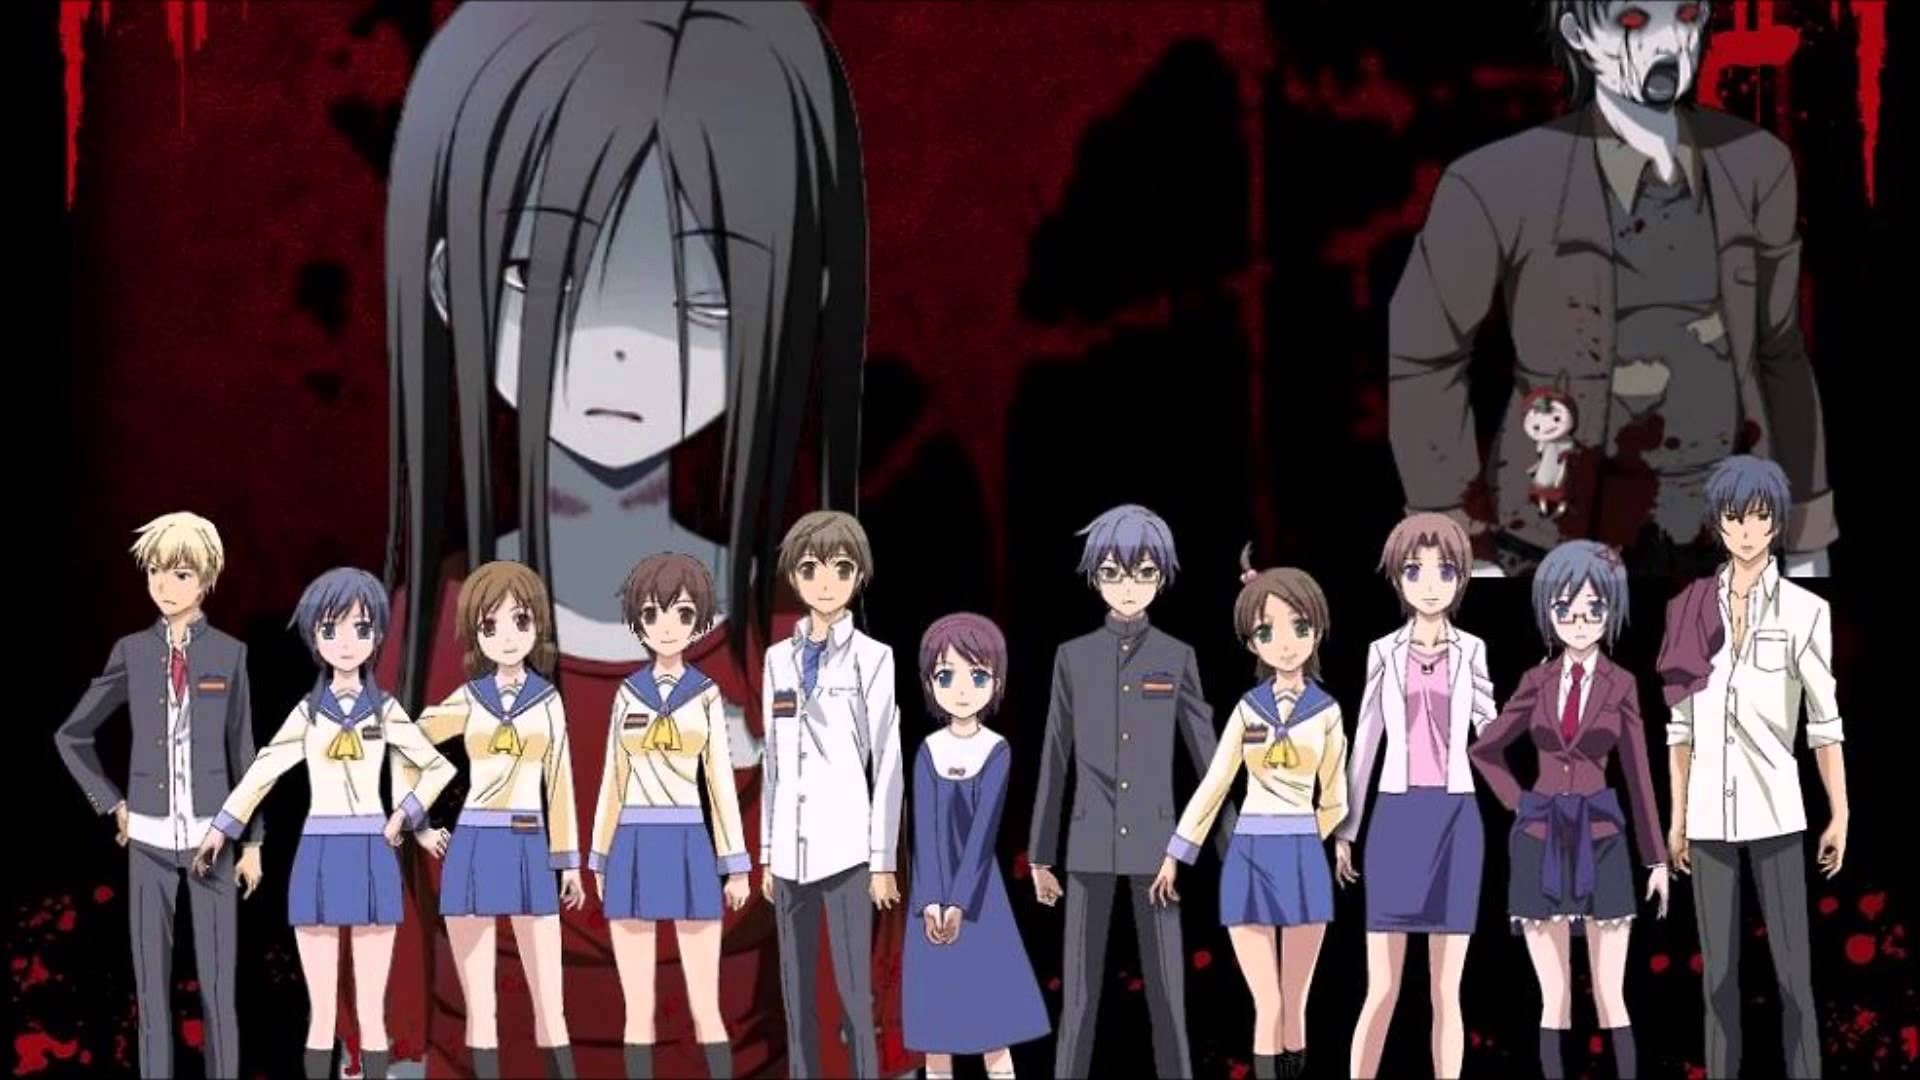 Corpse Party #5